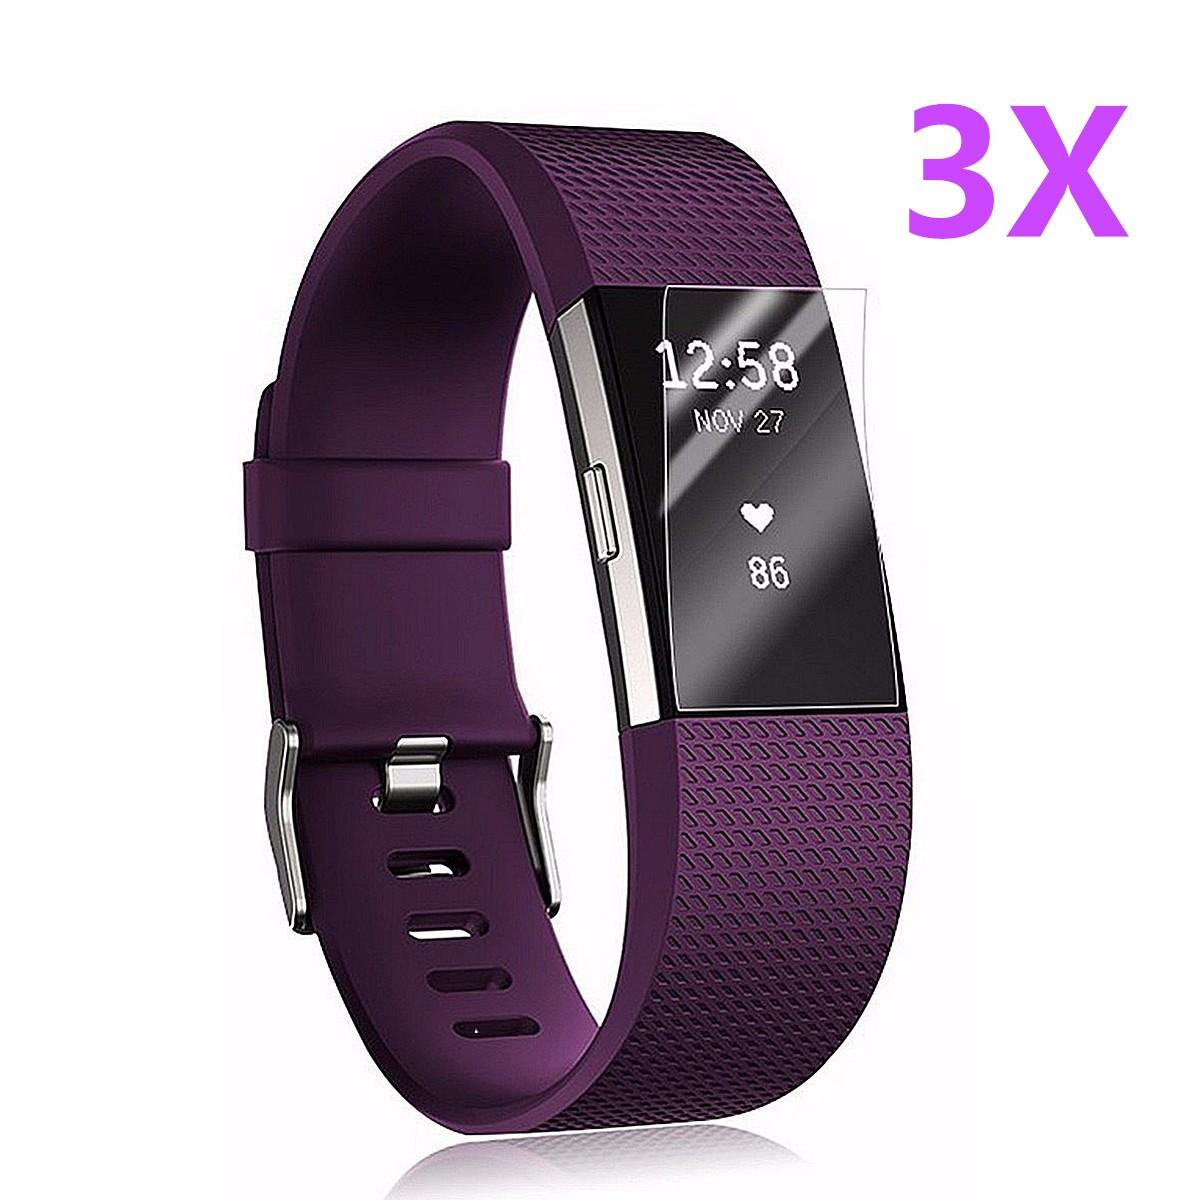 3x Anti-Scratch Clear HD Screen Protector Films Shield Guard voor Fitbit Charge 2